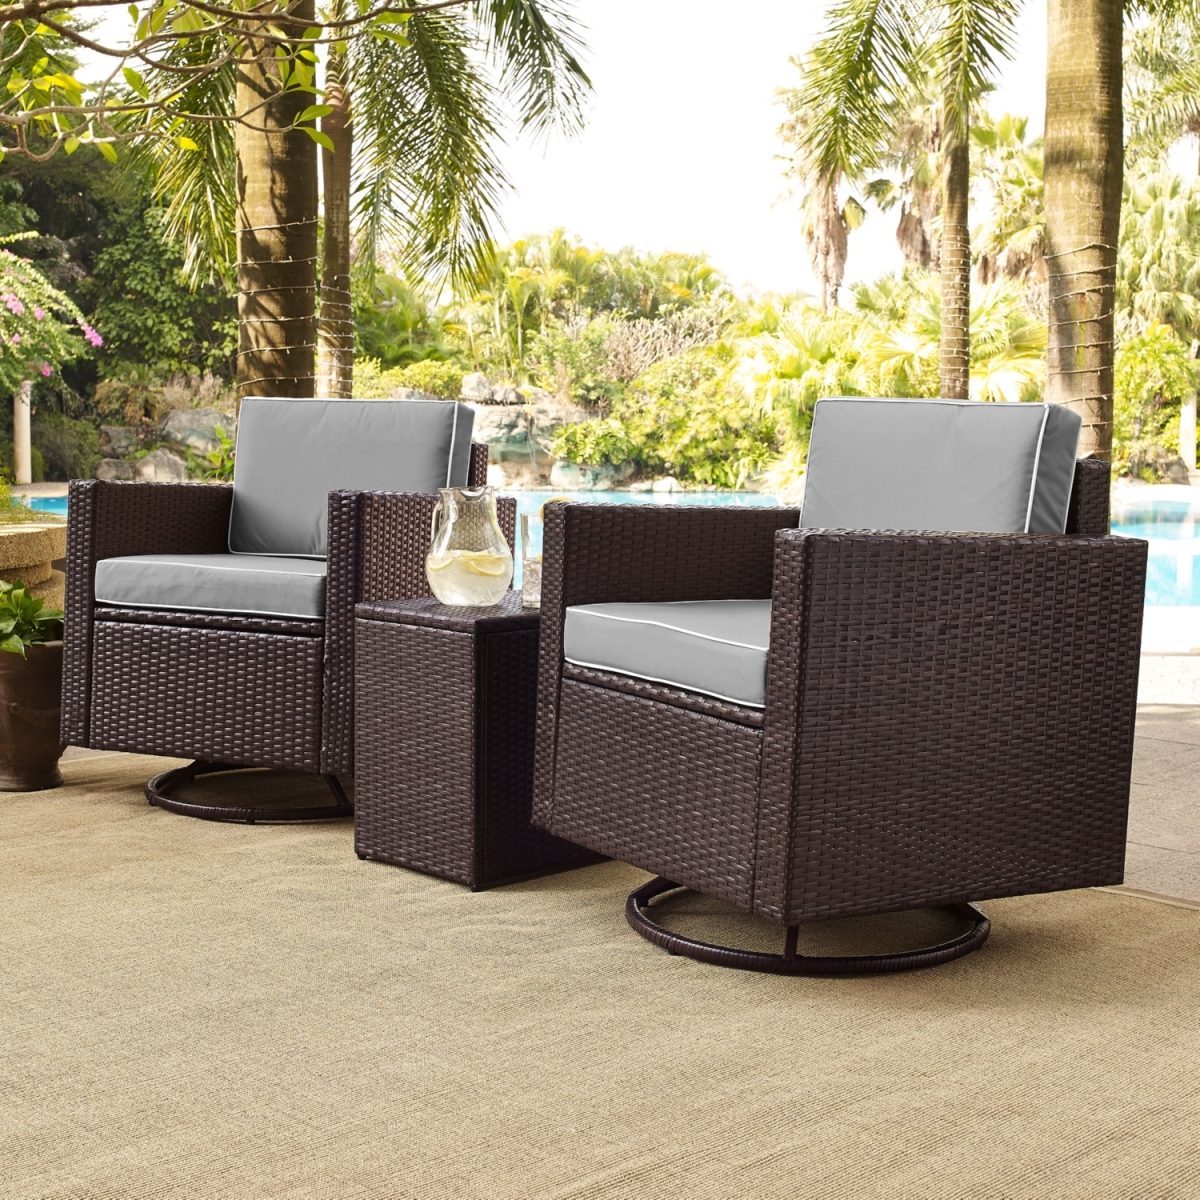 Ko70058br-gy 3-piece Palm Harbor Outdoor Wicker Conversation Set With Grey Cushions, Two Swivel Chairs & Side Table